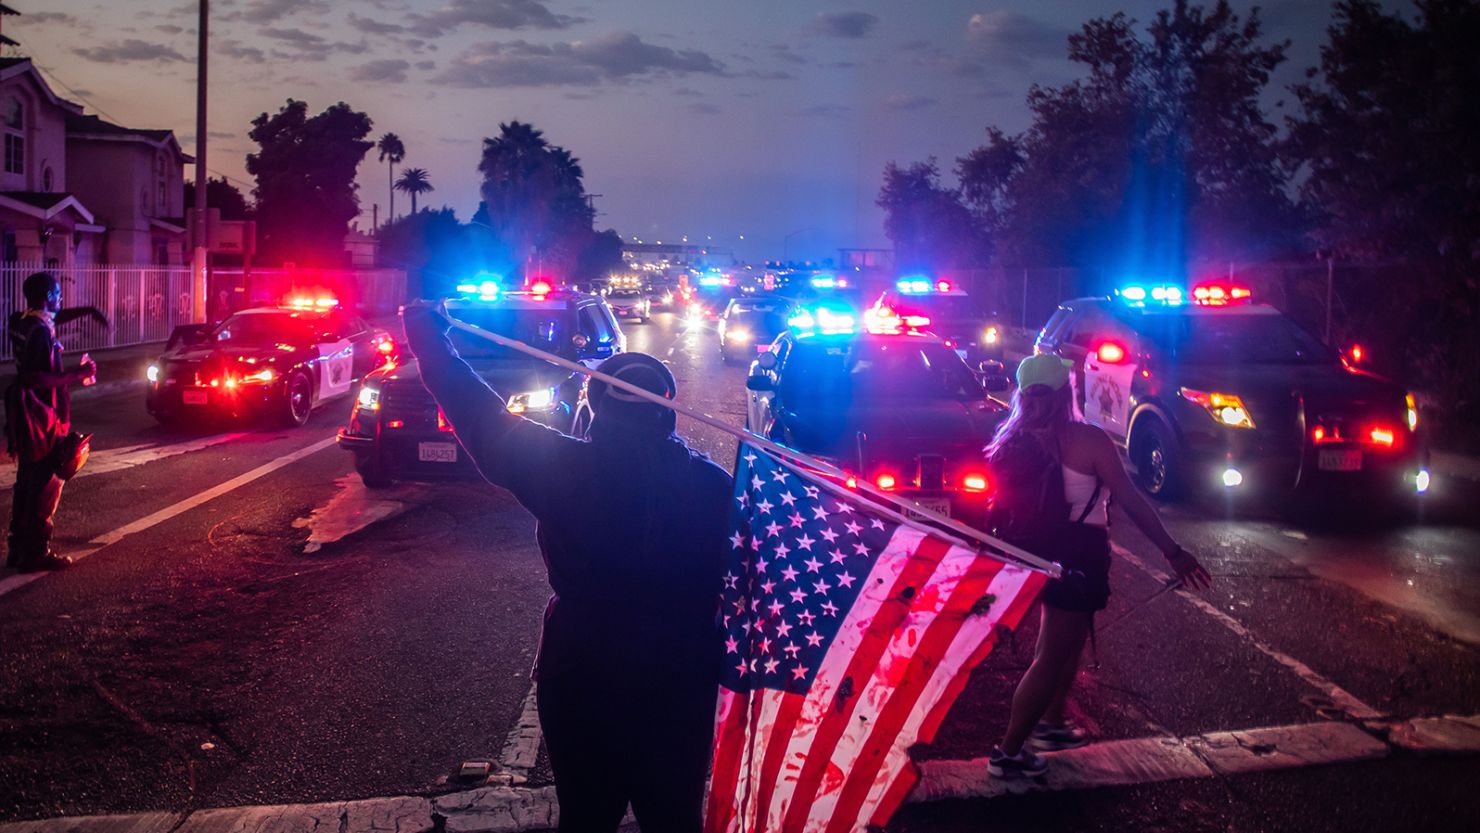 A man holds a US National flag in front of Police cars during a demonstration  in Los Angeles, California on September 5, 2020.